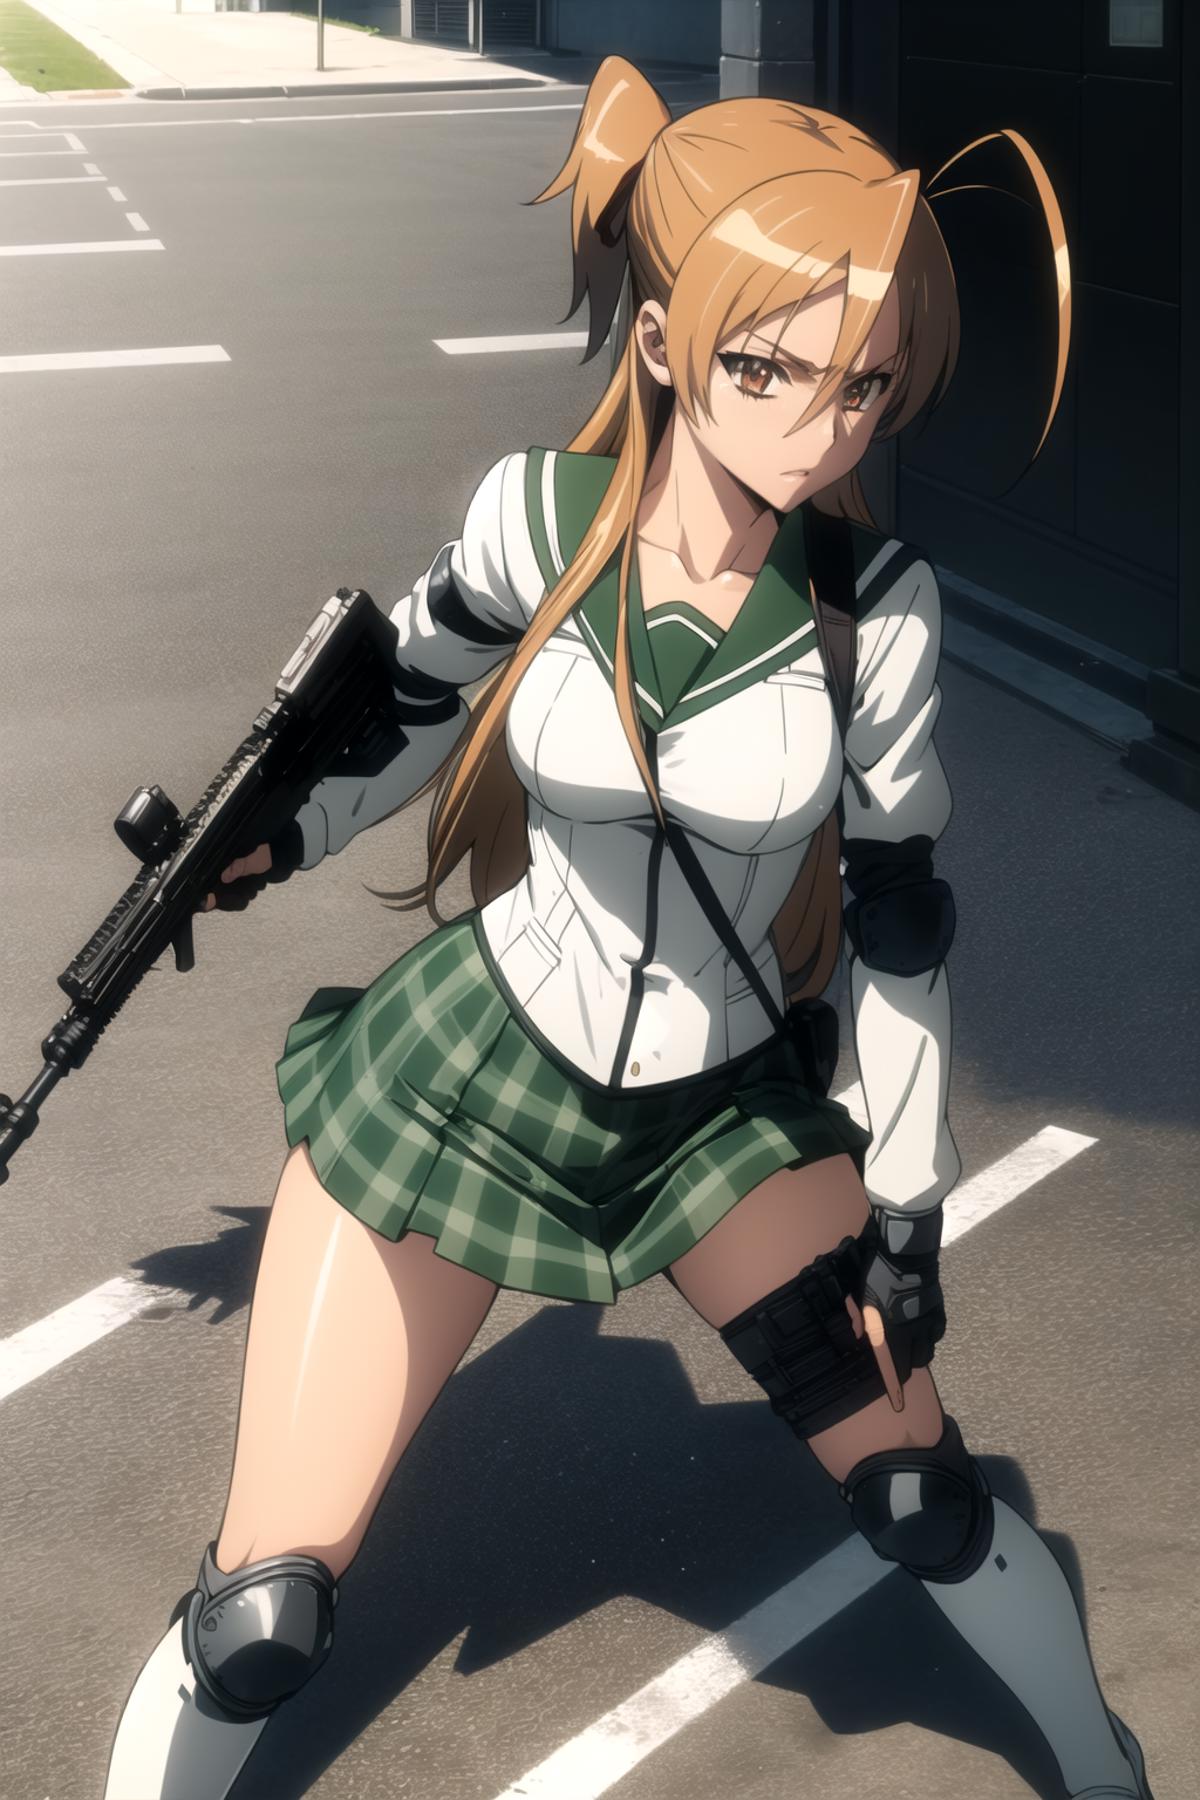 Highschool of the Dead (style + characters) image by psoft